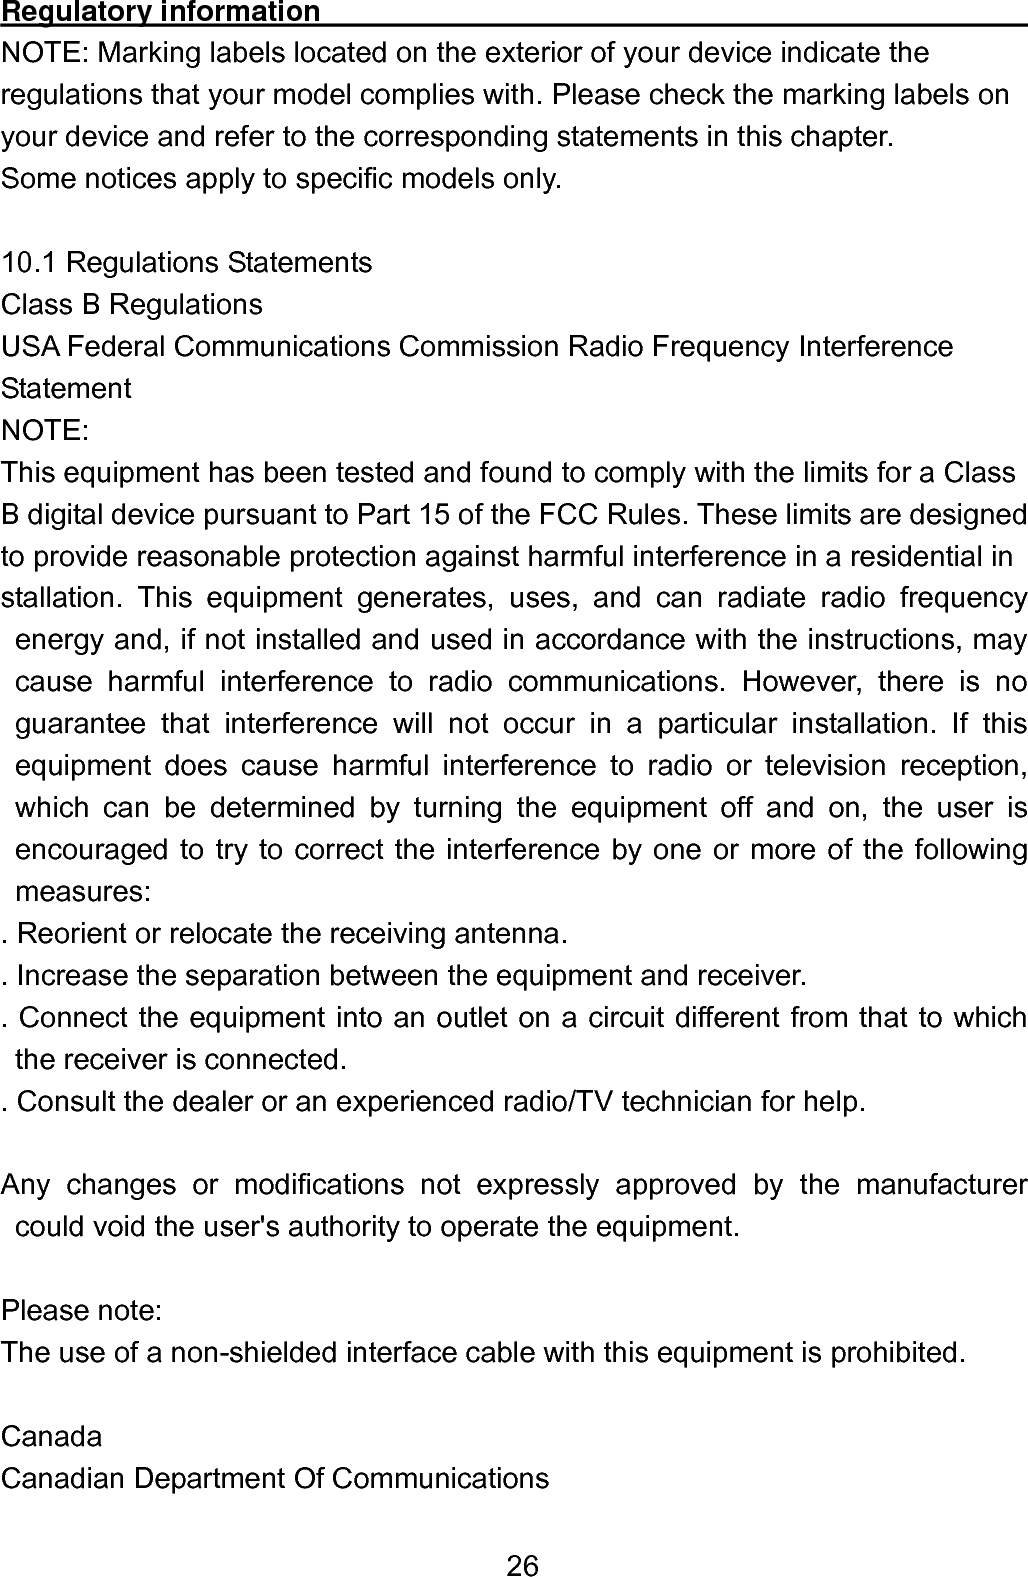  26Regulatory information                                                  NOTE: Marking labels located on the exterior of your device indicate the regulations that your model complies with. Please check the marking labels on your device and refer to the corresponding statements in this chapter. Some notices apply to specific models only.  10.1 Regulations Statements Class B Regulations USA Federal Communications Commission Radio Frequency Interference   Statement NOTE:  This equipment has been tested and found to comply with the limits for a Class   B digital device pursuant to Part 15 of the FCC Rules. These limits are designed   to provide reasonable protection against harmful interference in a residential in stallation. This equipment generates, uses, and can radiate radio frequency energy and, if not installed and used in accordance with the instructions, may cause harmful interference to radio communications. However, there is no guarantee that interference will not occur in a particular installation. If this equipment does cause harmful interference to radio or television reception, which can be determined by turning the equipment off and on, the user is encouraged to try to correct the interference by one or more of the following measures: . Reorient or relocate the receiving antenna.   . Increase the separation between the equipment and receiver. . Connect the equipment into an outlet on a circuit different from that to which the receiver is connected.   . Consult the dealer or an experienced radio/TV technician for help.  Any changes or modifications not expressly approved by the manufacturer could void the user&apos;s authority to operate the equipment.  Please note: The use of a non-shielded interface cable with this equipment is prohibited.  Canada Canadian Department Of Communications 